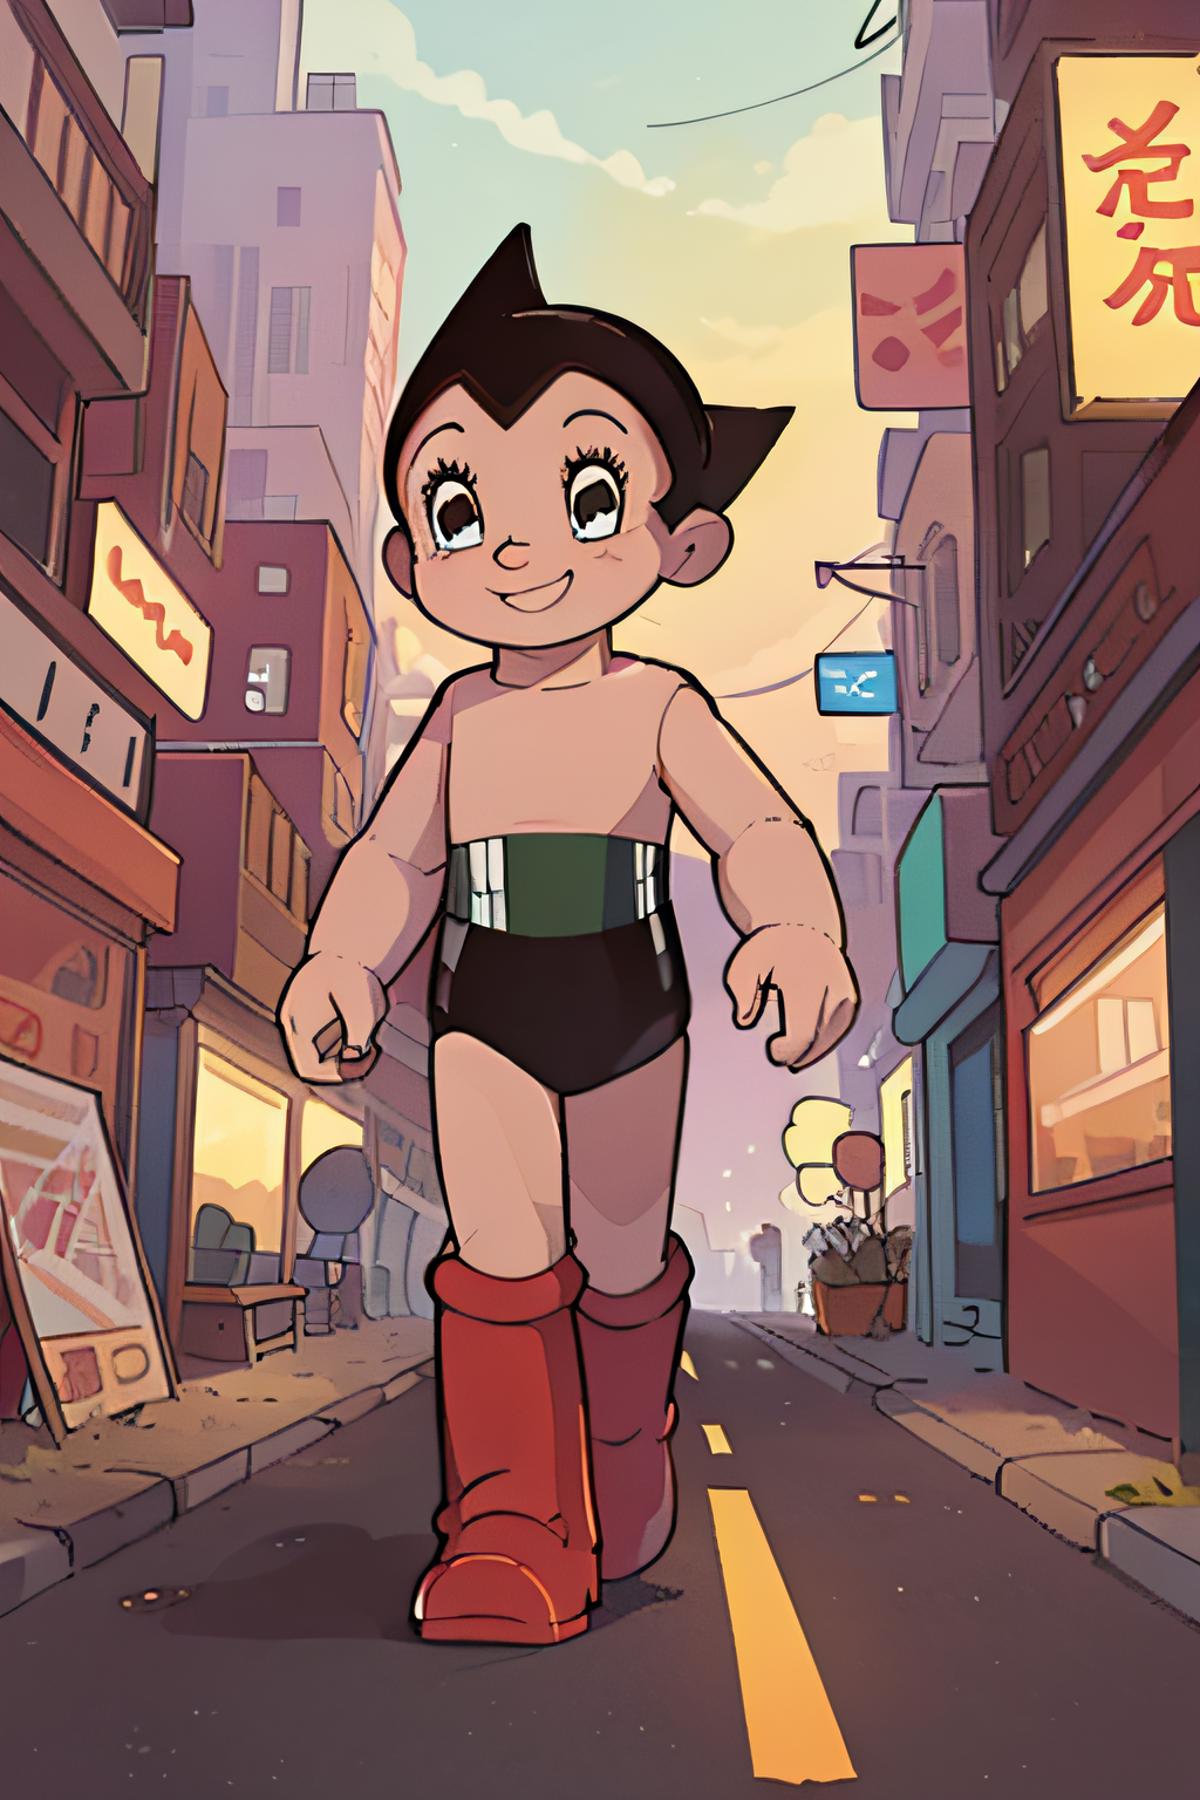 Astro Boy image by manetoys83987